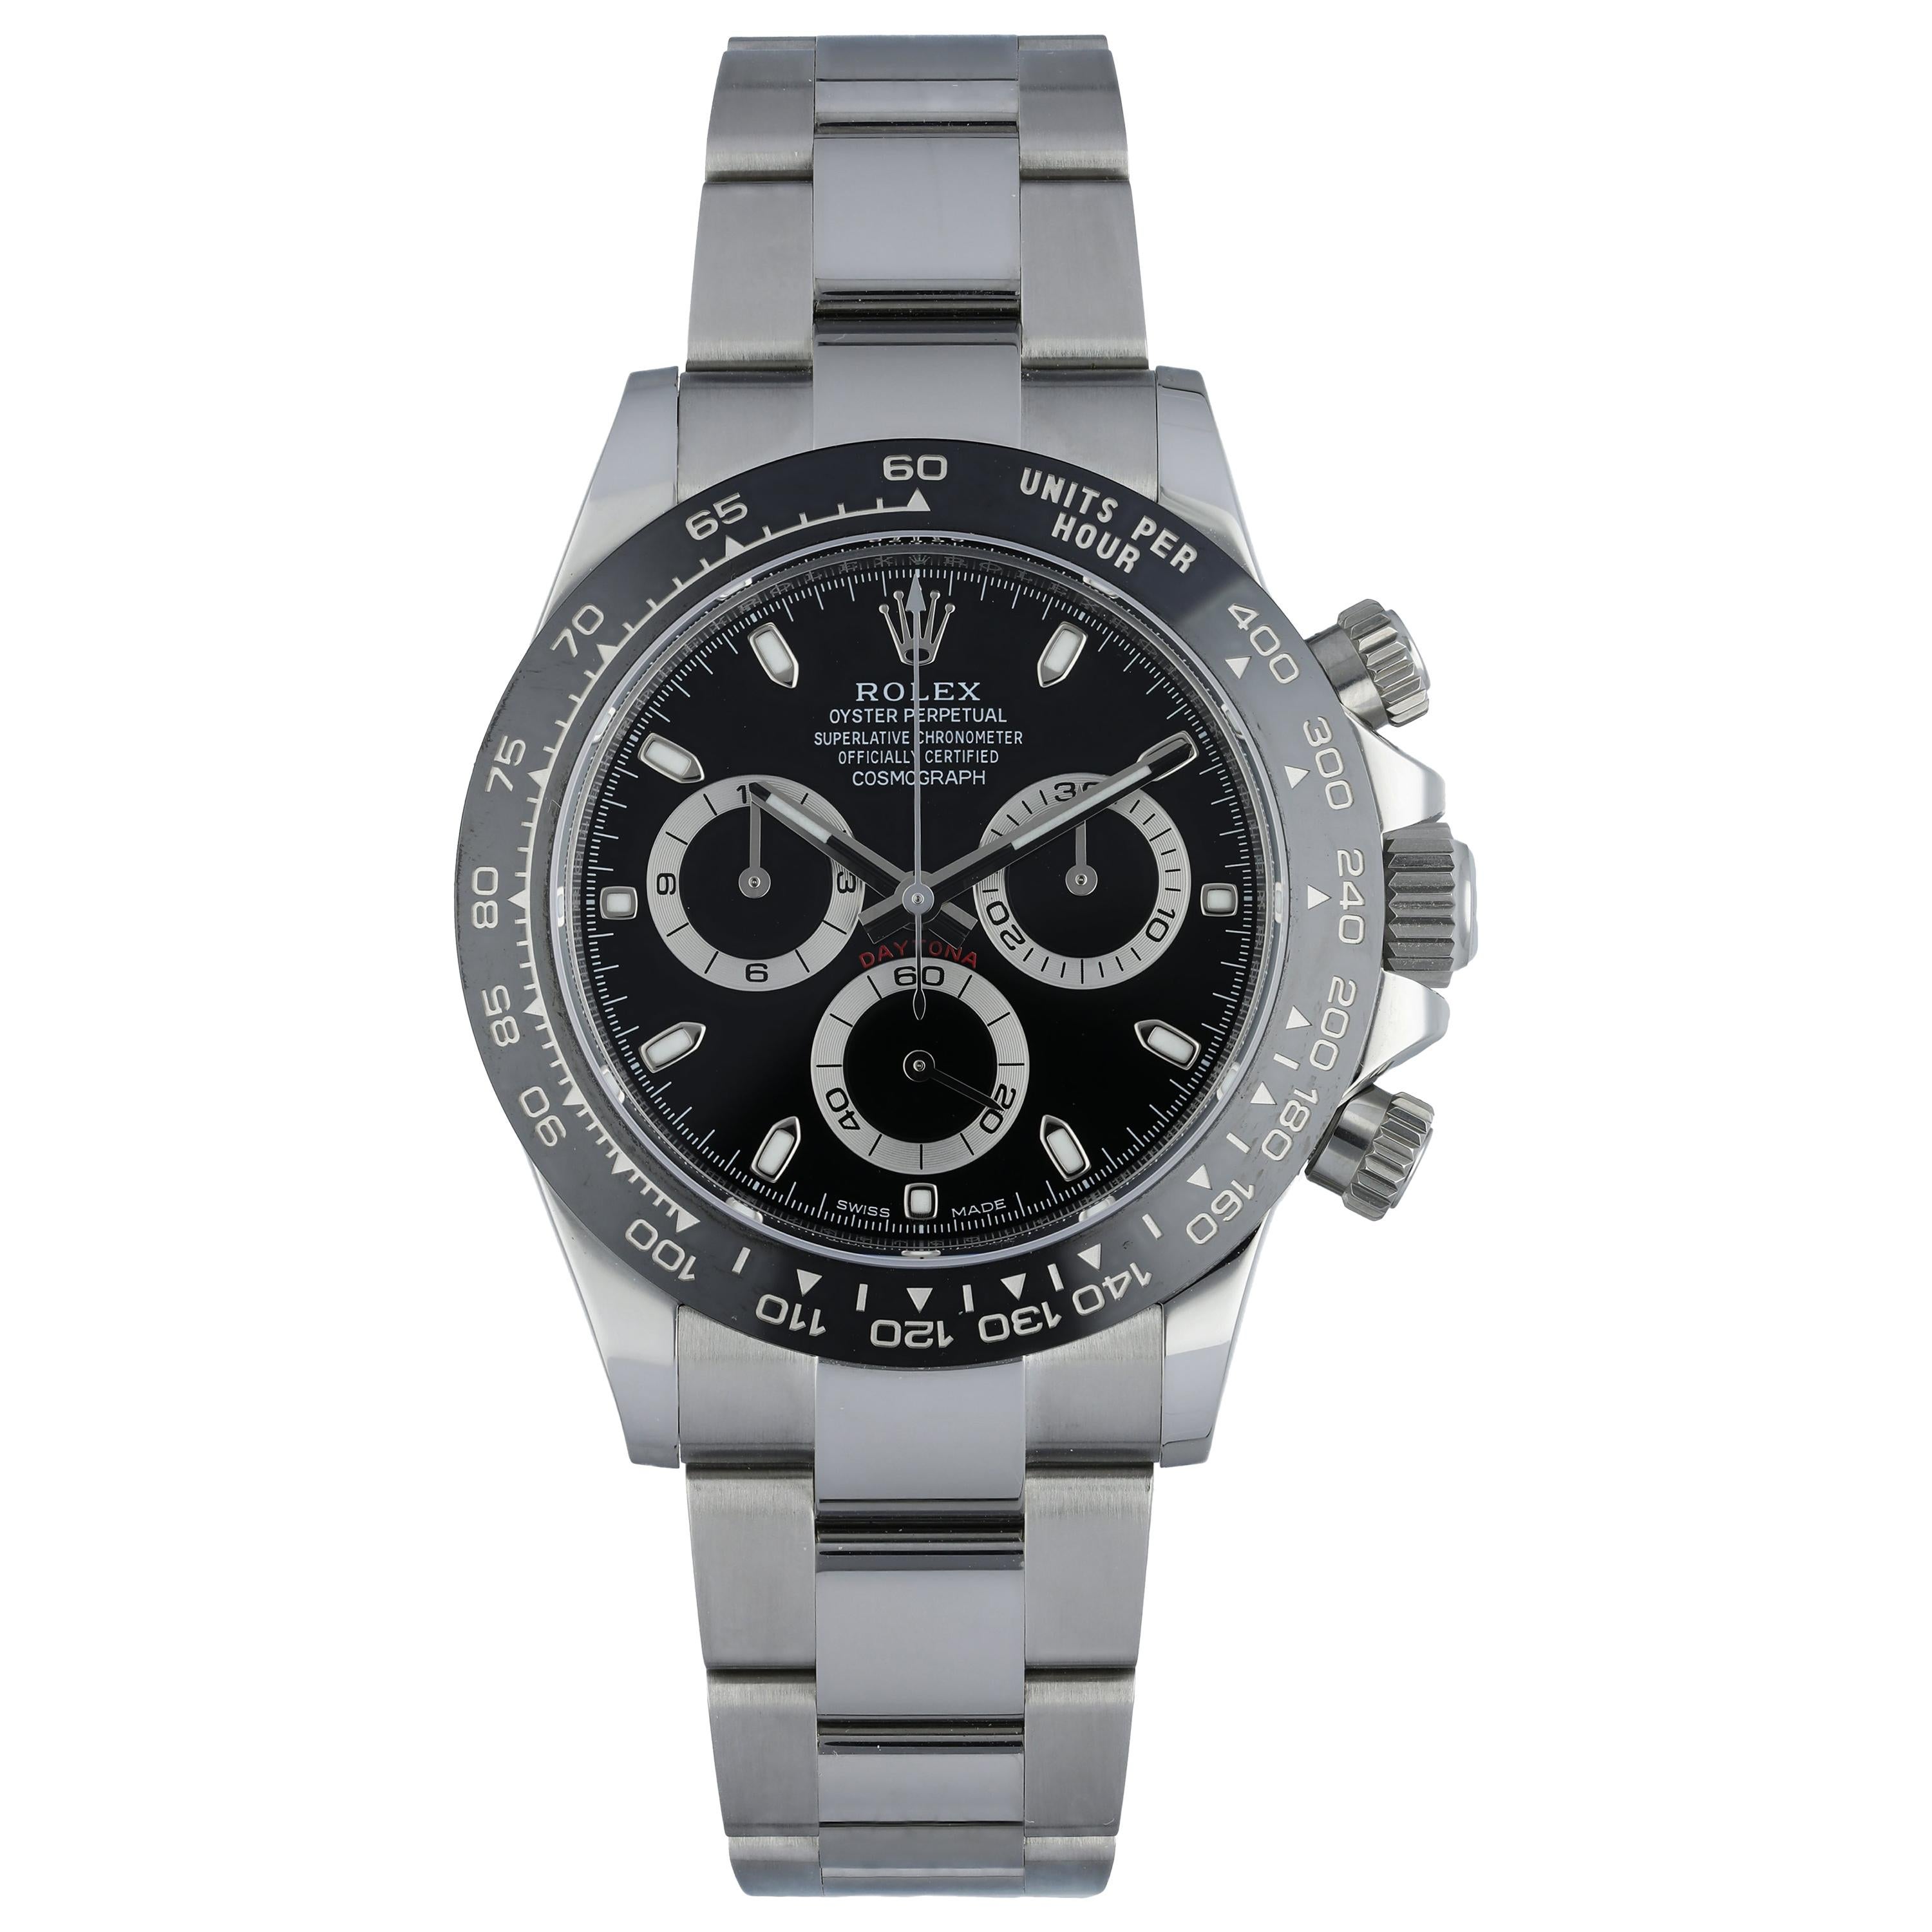 Rolex Cosmograph Daytona 116500LN Men's Watch Box Papers For Sale